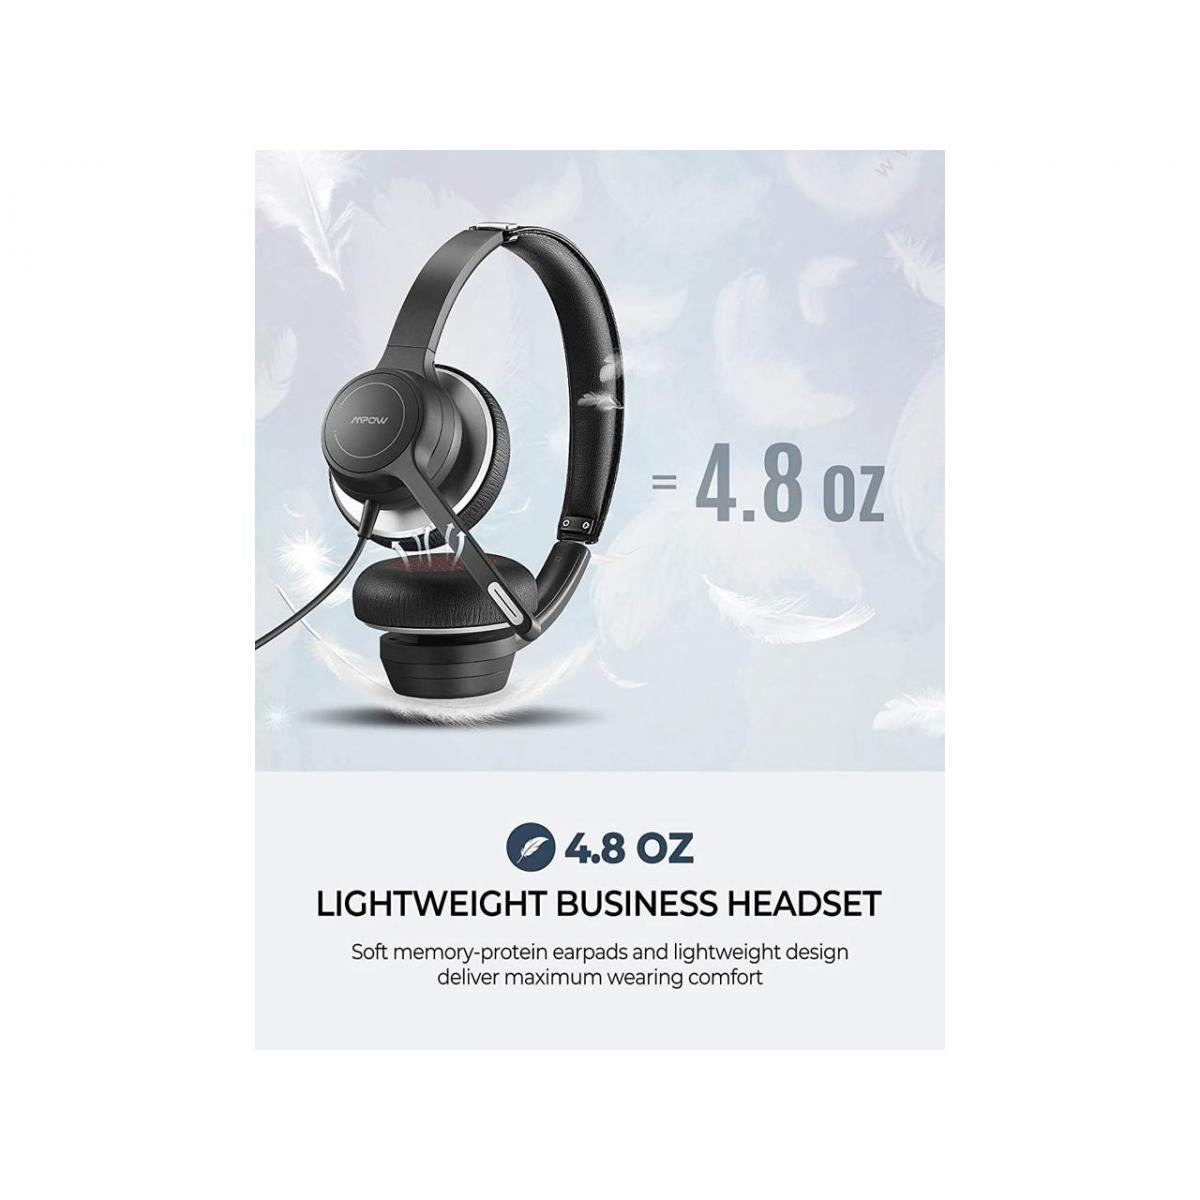 MPOW HC6 Business Wired Headset Black+Silver